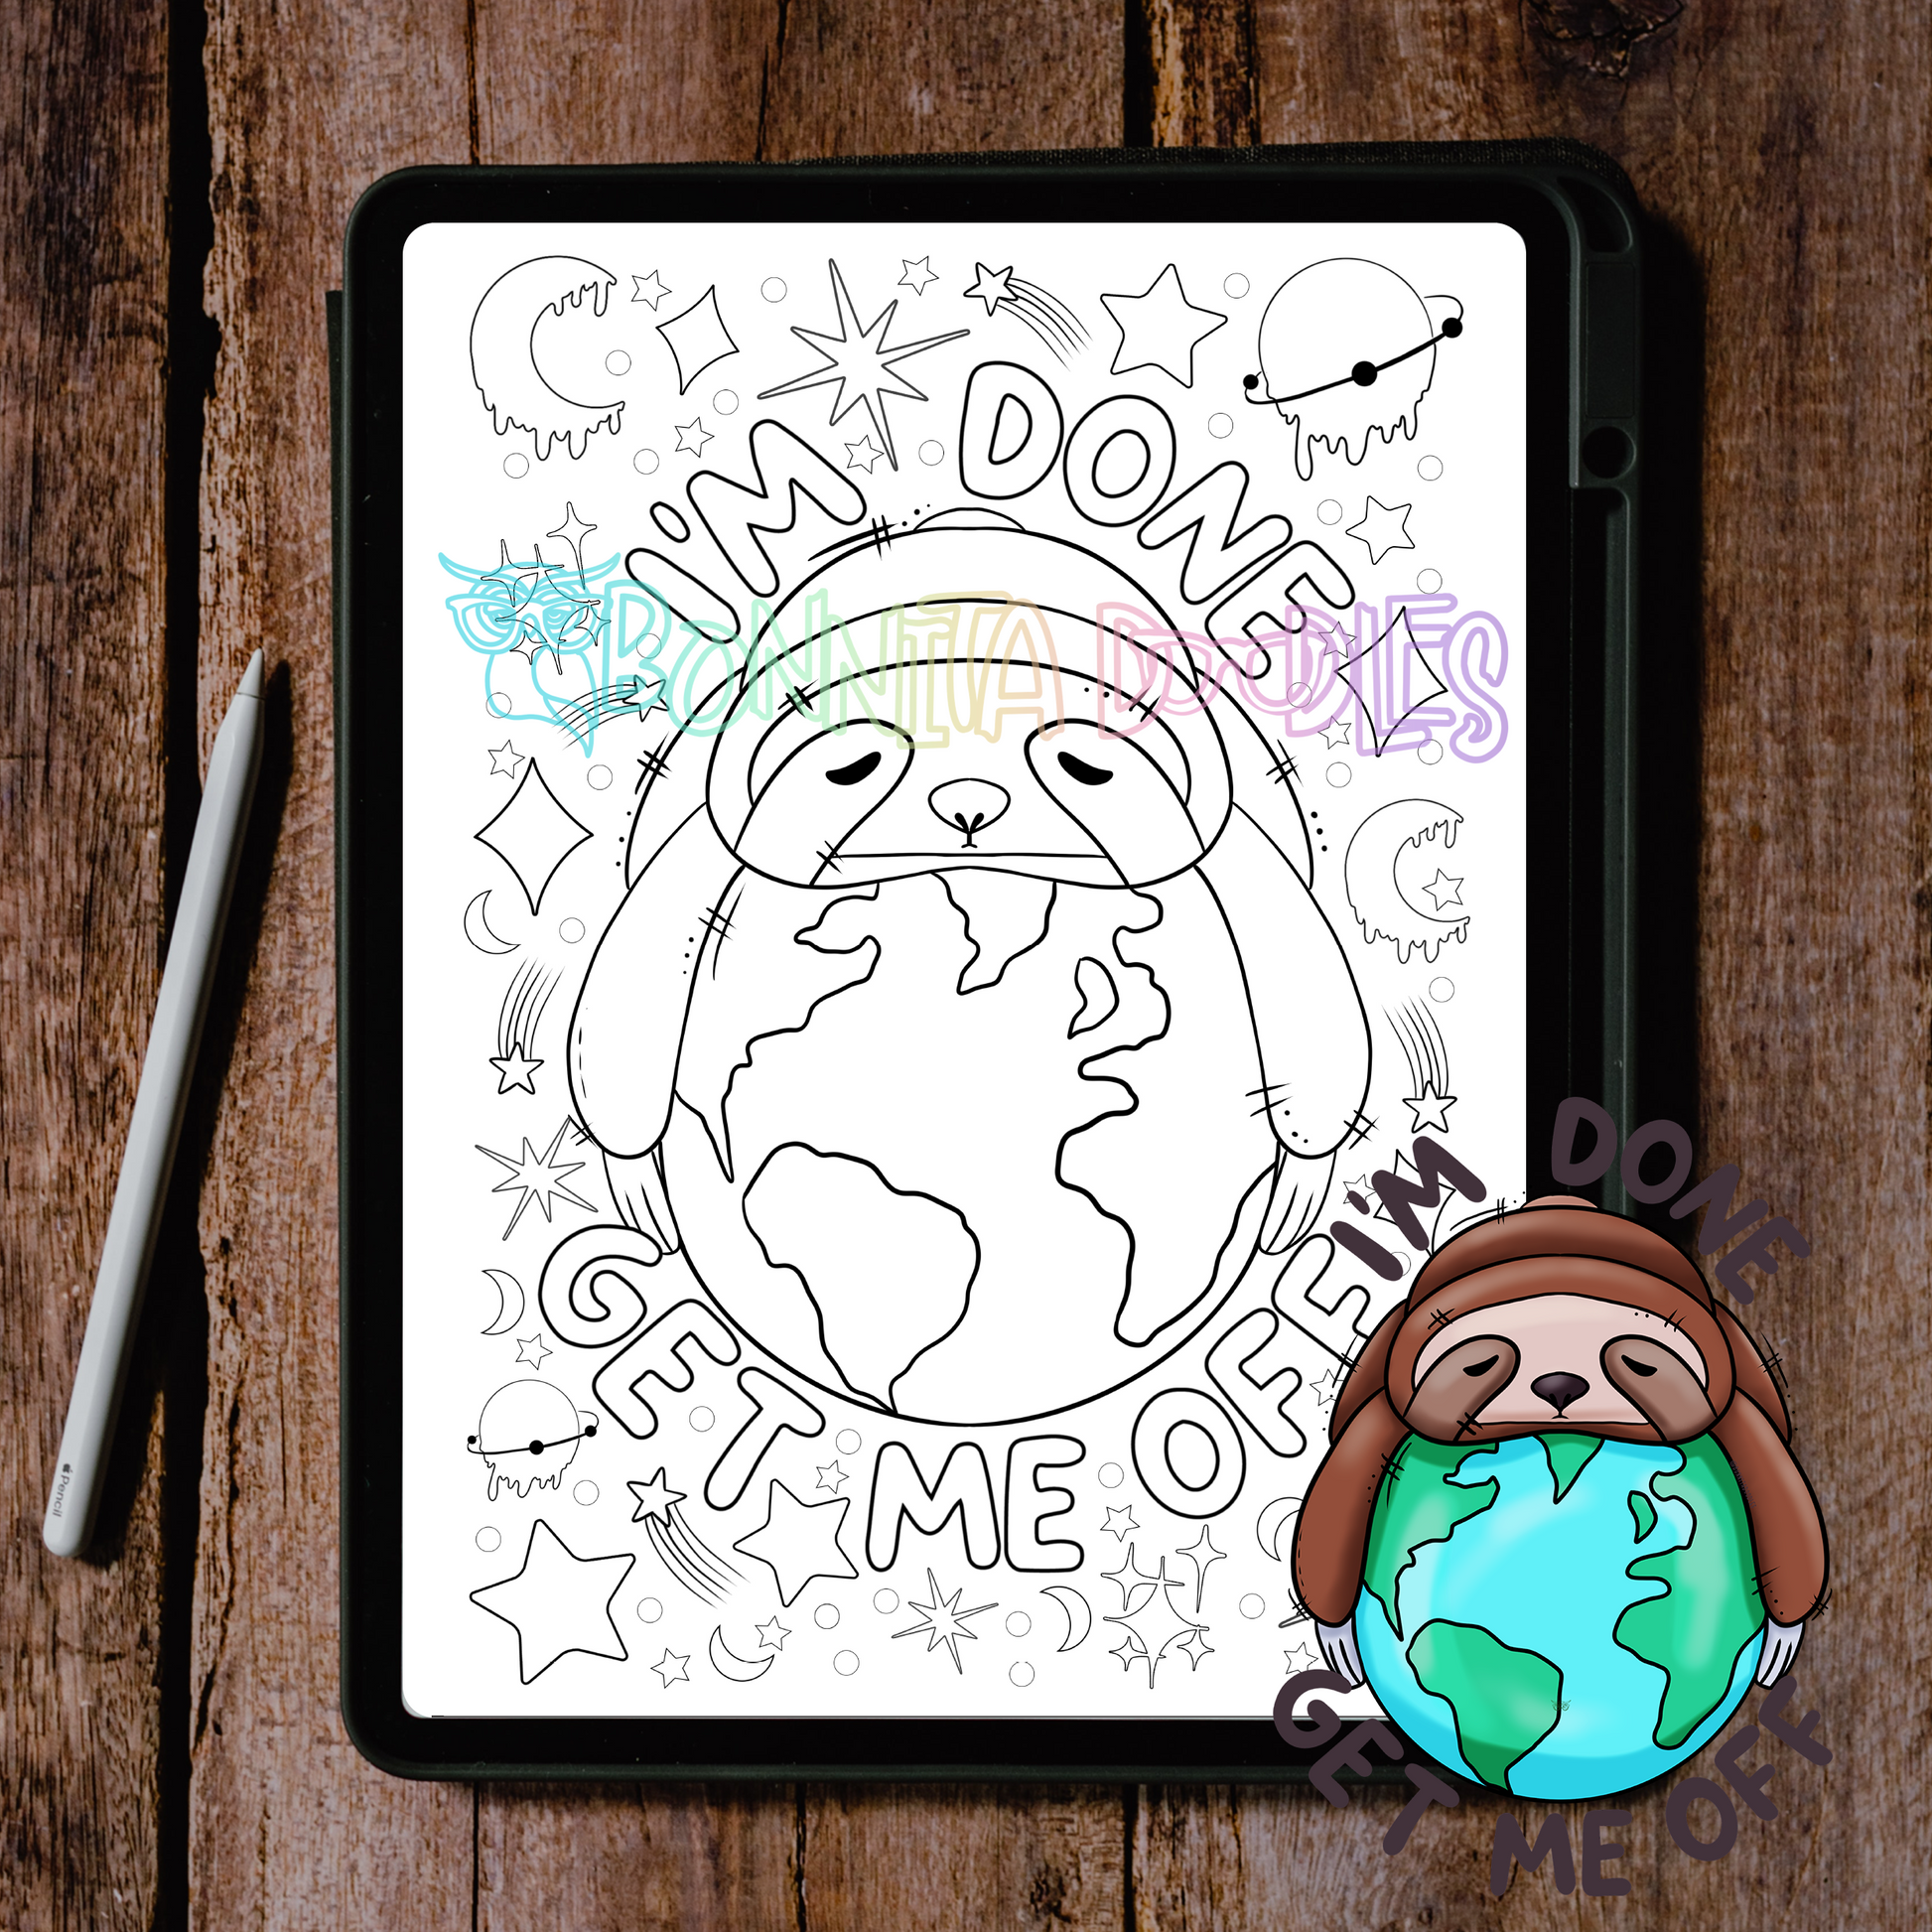 I'm done get me off colouring sheet on an ipad, with a sloth hugging the world exhausted, fatigued and chronically ill colouring 